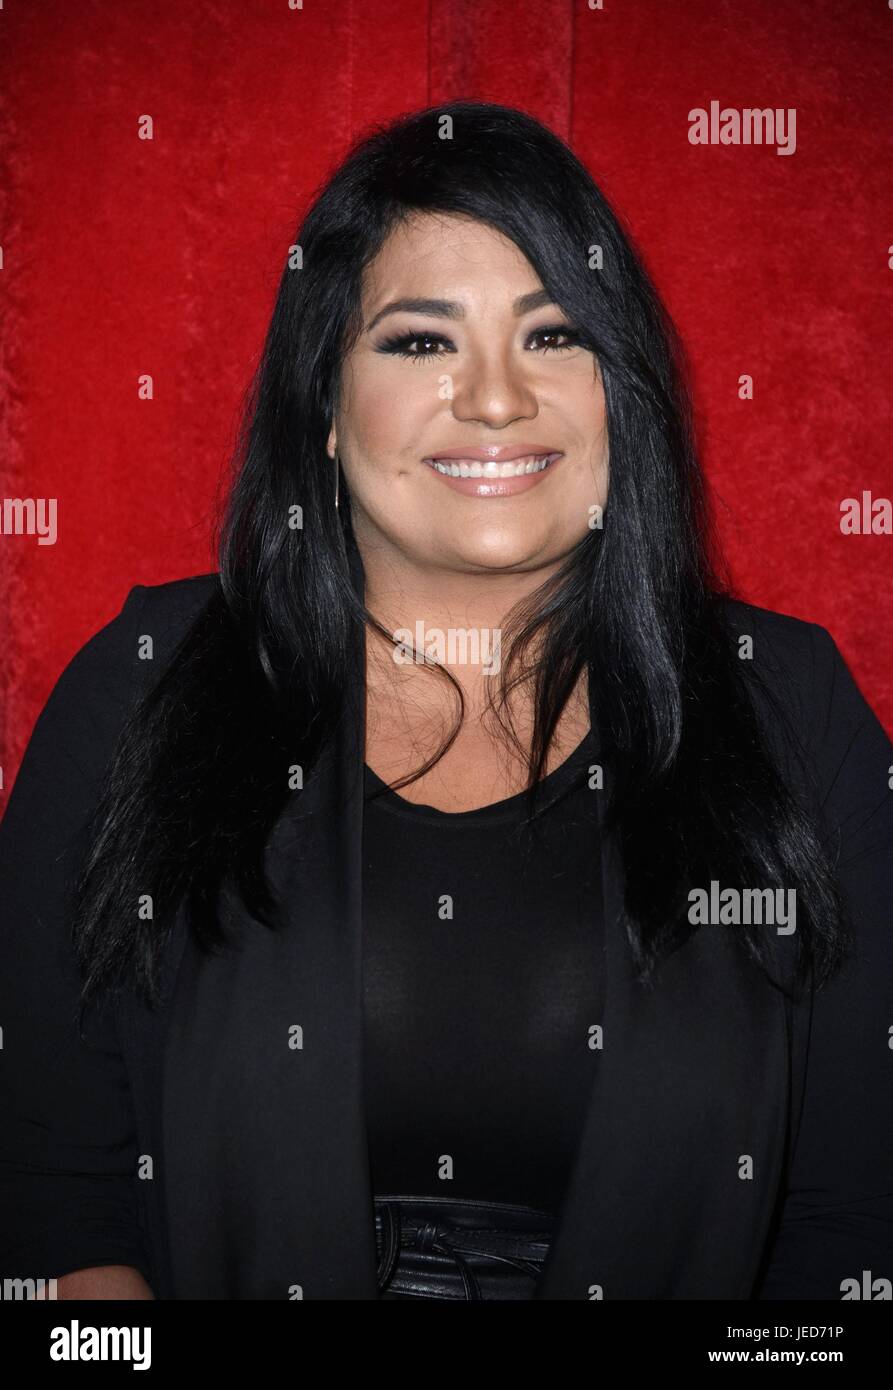 New York, NY, USA. 23rd June, 2017. Suzette Quintanilla in attendance for Madame Tussauds New York Unveils Selena Quintanilla's Wax Figure to Launch, Madame Tussauds, New York, NY June 23, 2017. Credit: Derek Storm/Everett Collection/Alamy Live News Stock Photo